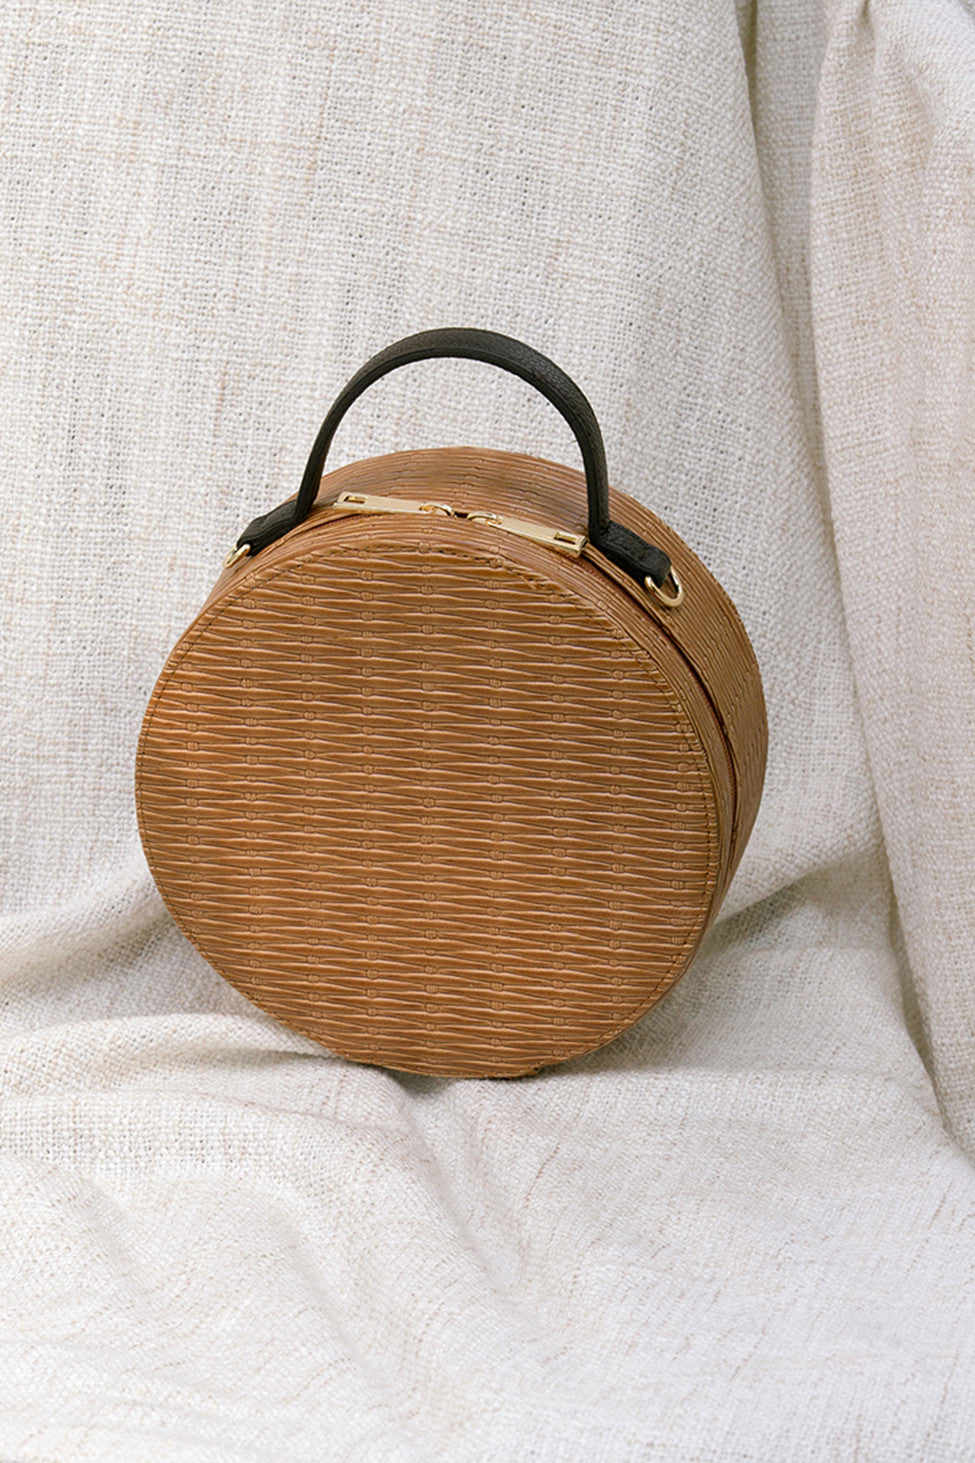 Marais bag in Brown. Woven round straw basket bag with fabric insert. Top handles. Detachable shoulder straps. 